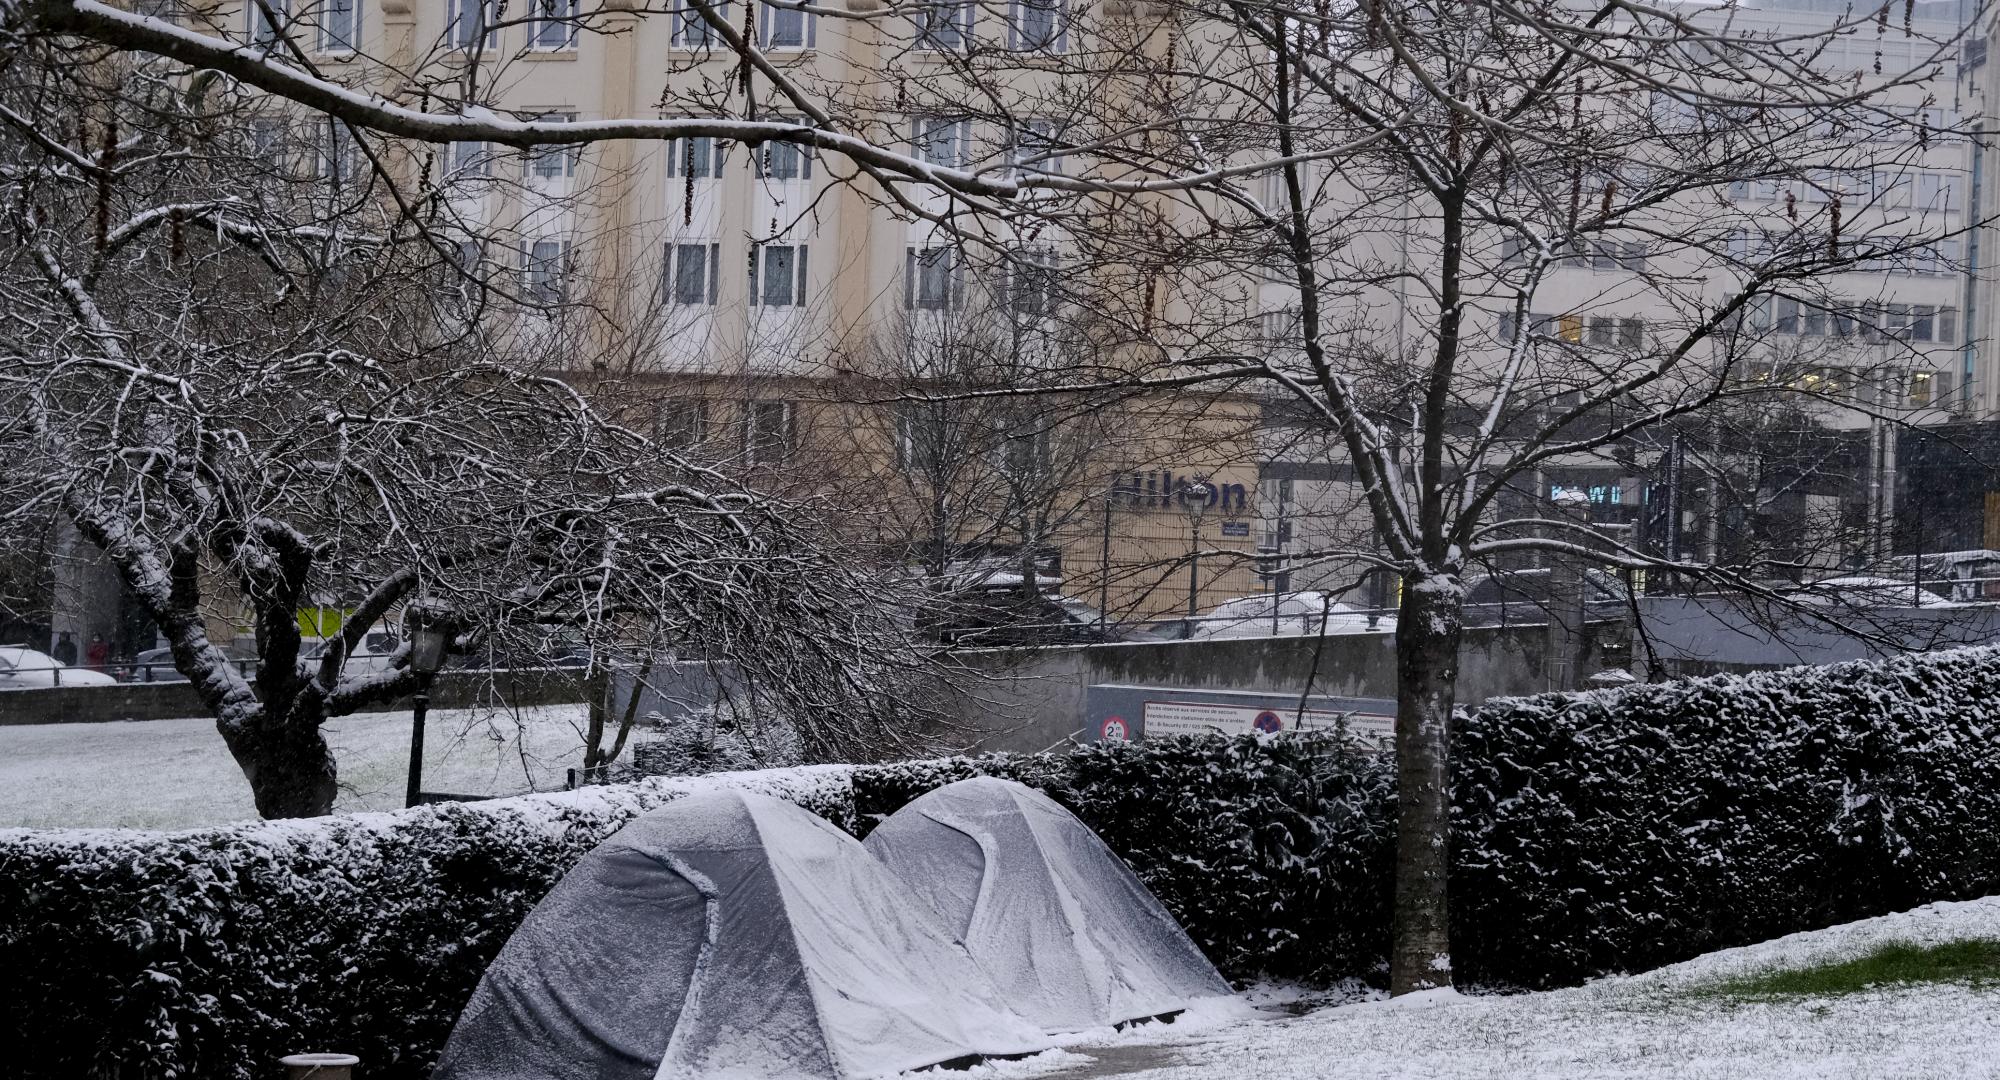 Tents of homeless people as seen in park during a heavy snowfall